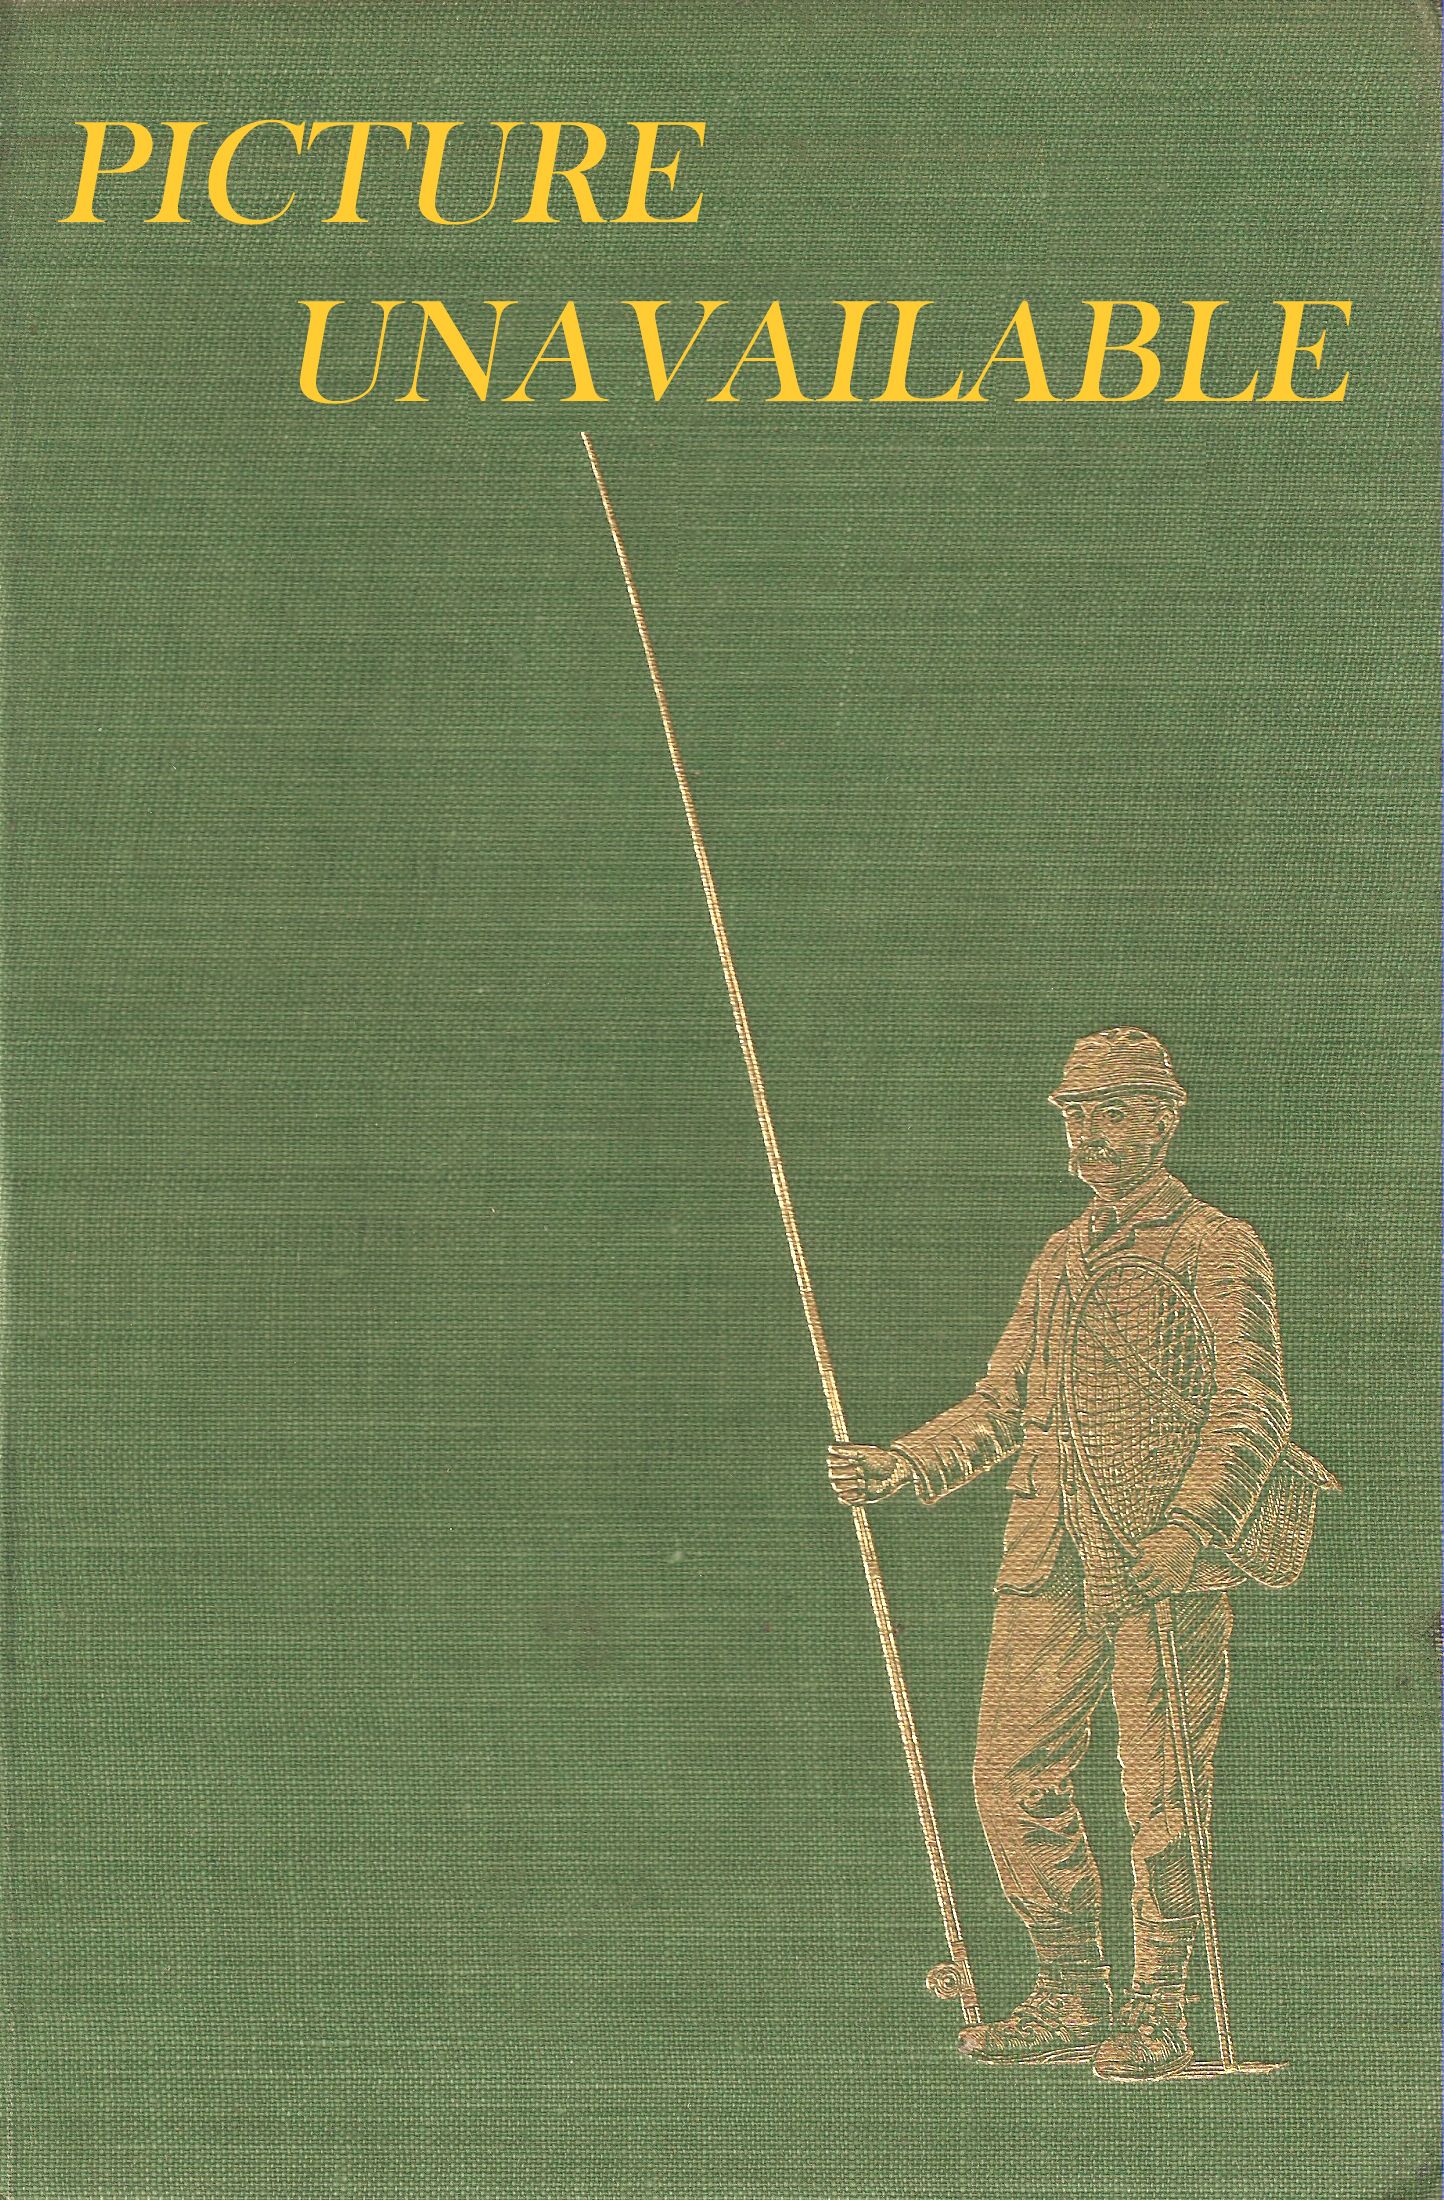 INTRODUCTION TO ANGLING: The Beaufort Library Volume I. By Eric Taverner.